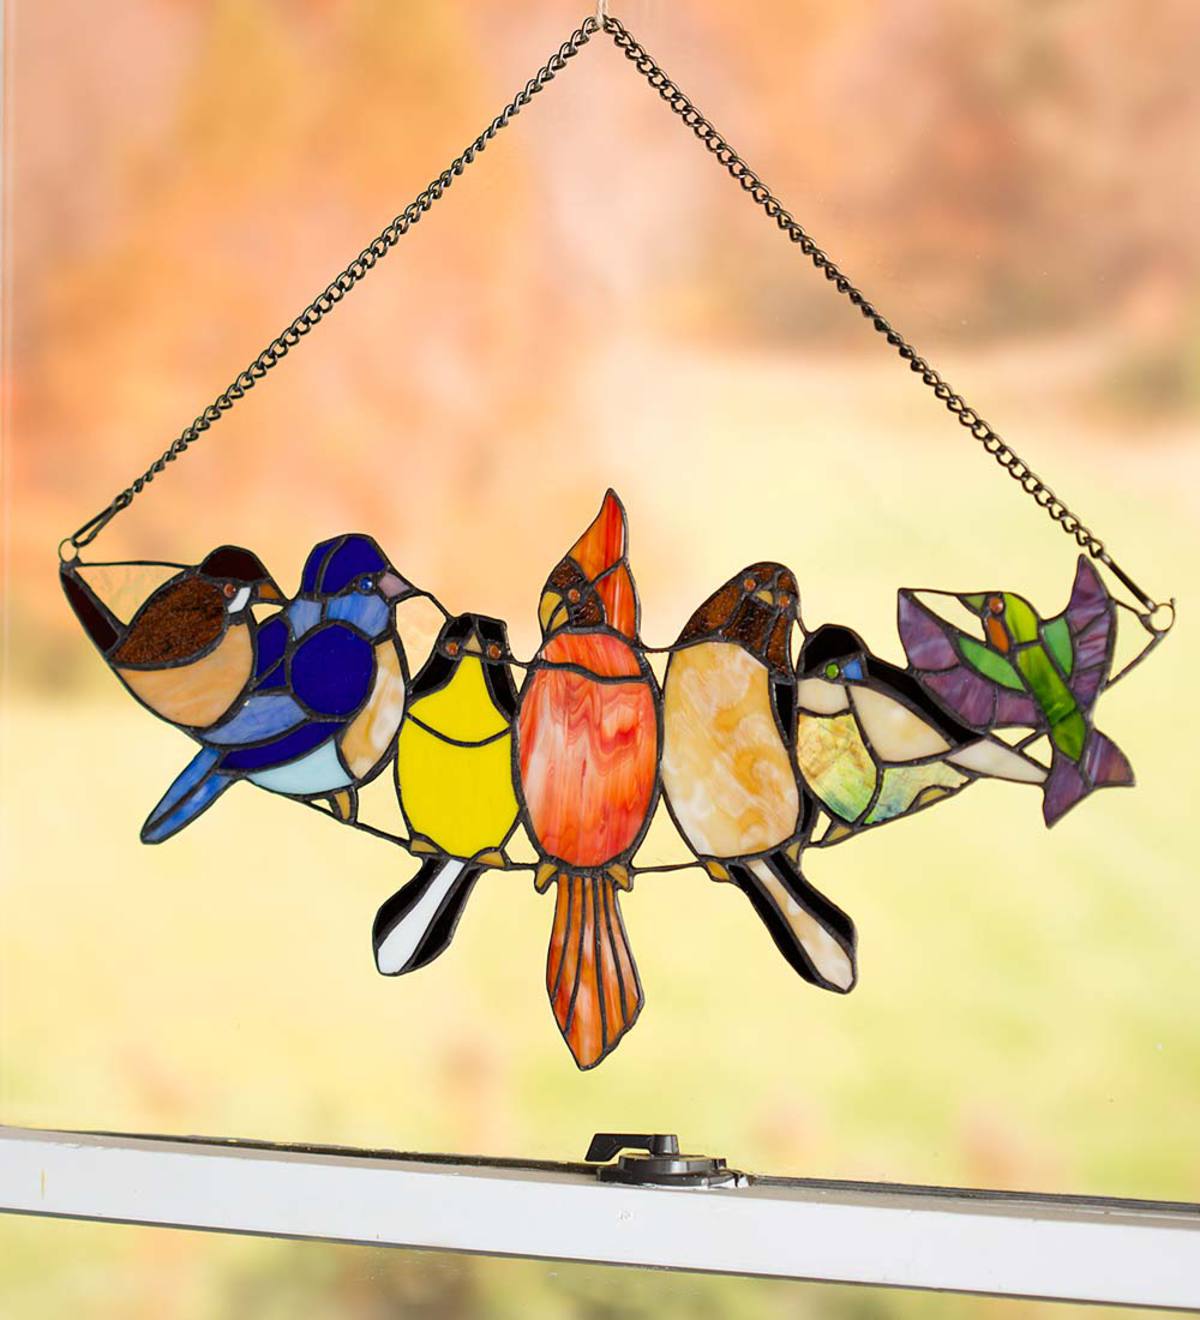 Hanging Stained Glass Bird Art